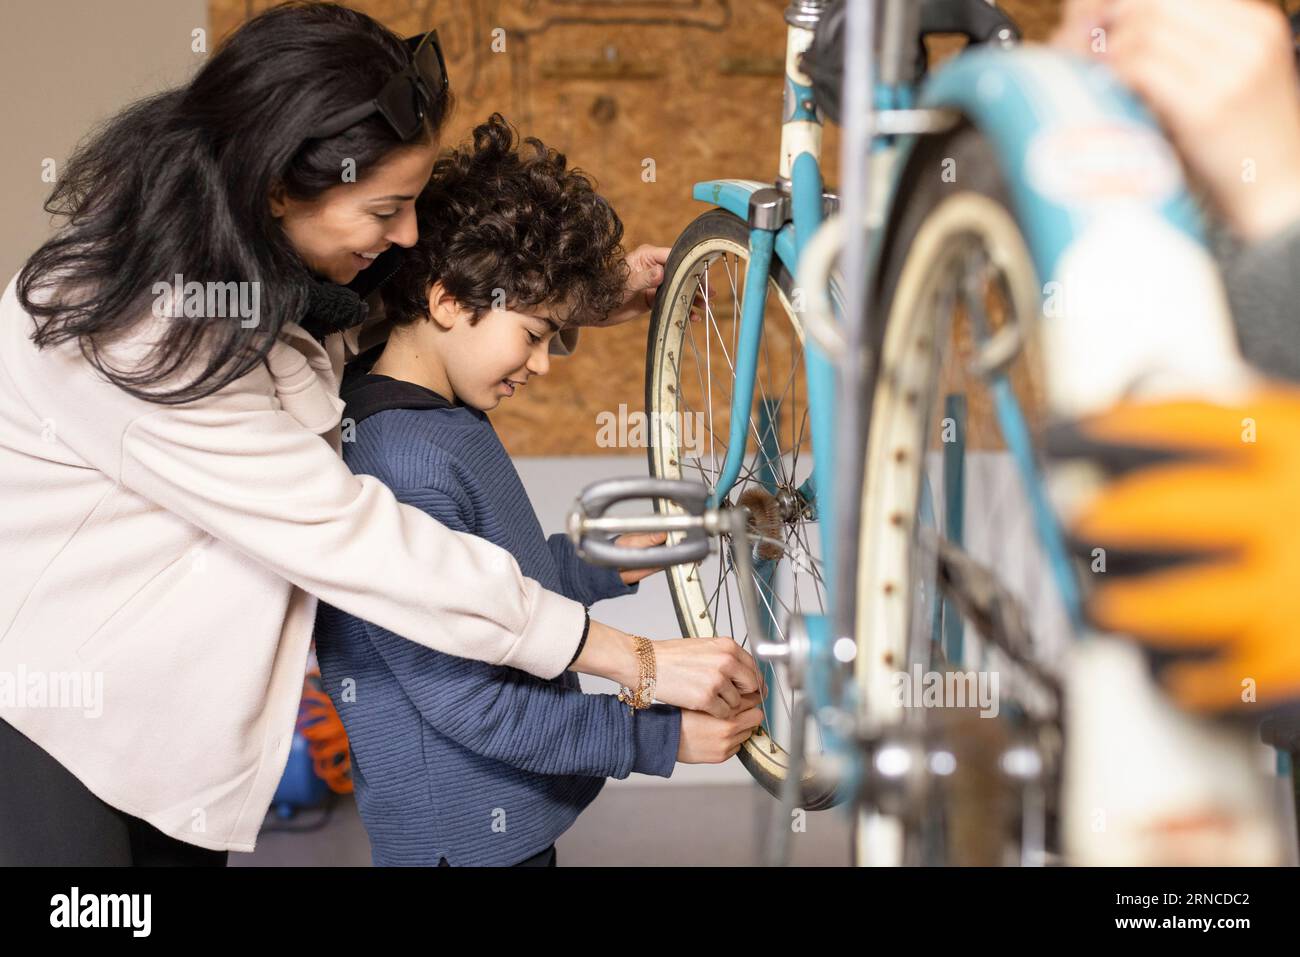 Side view of happy woman assisting son learning to repair bicycle at recycling center Stock Photo